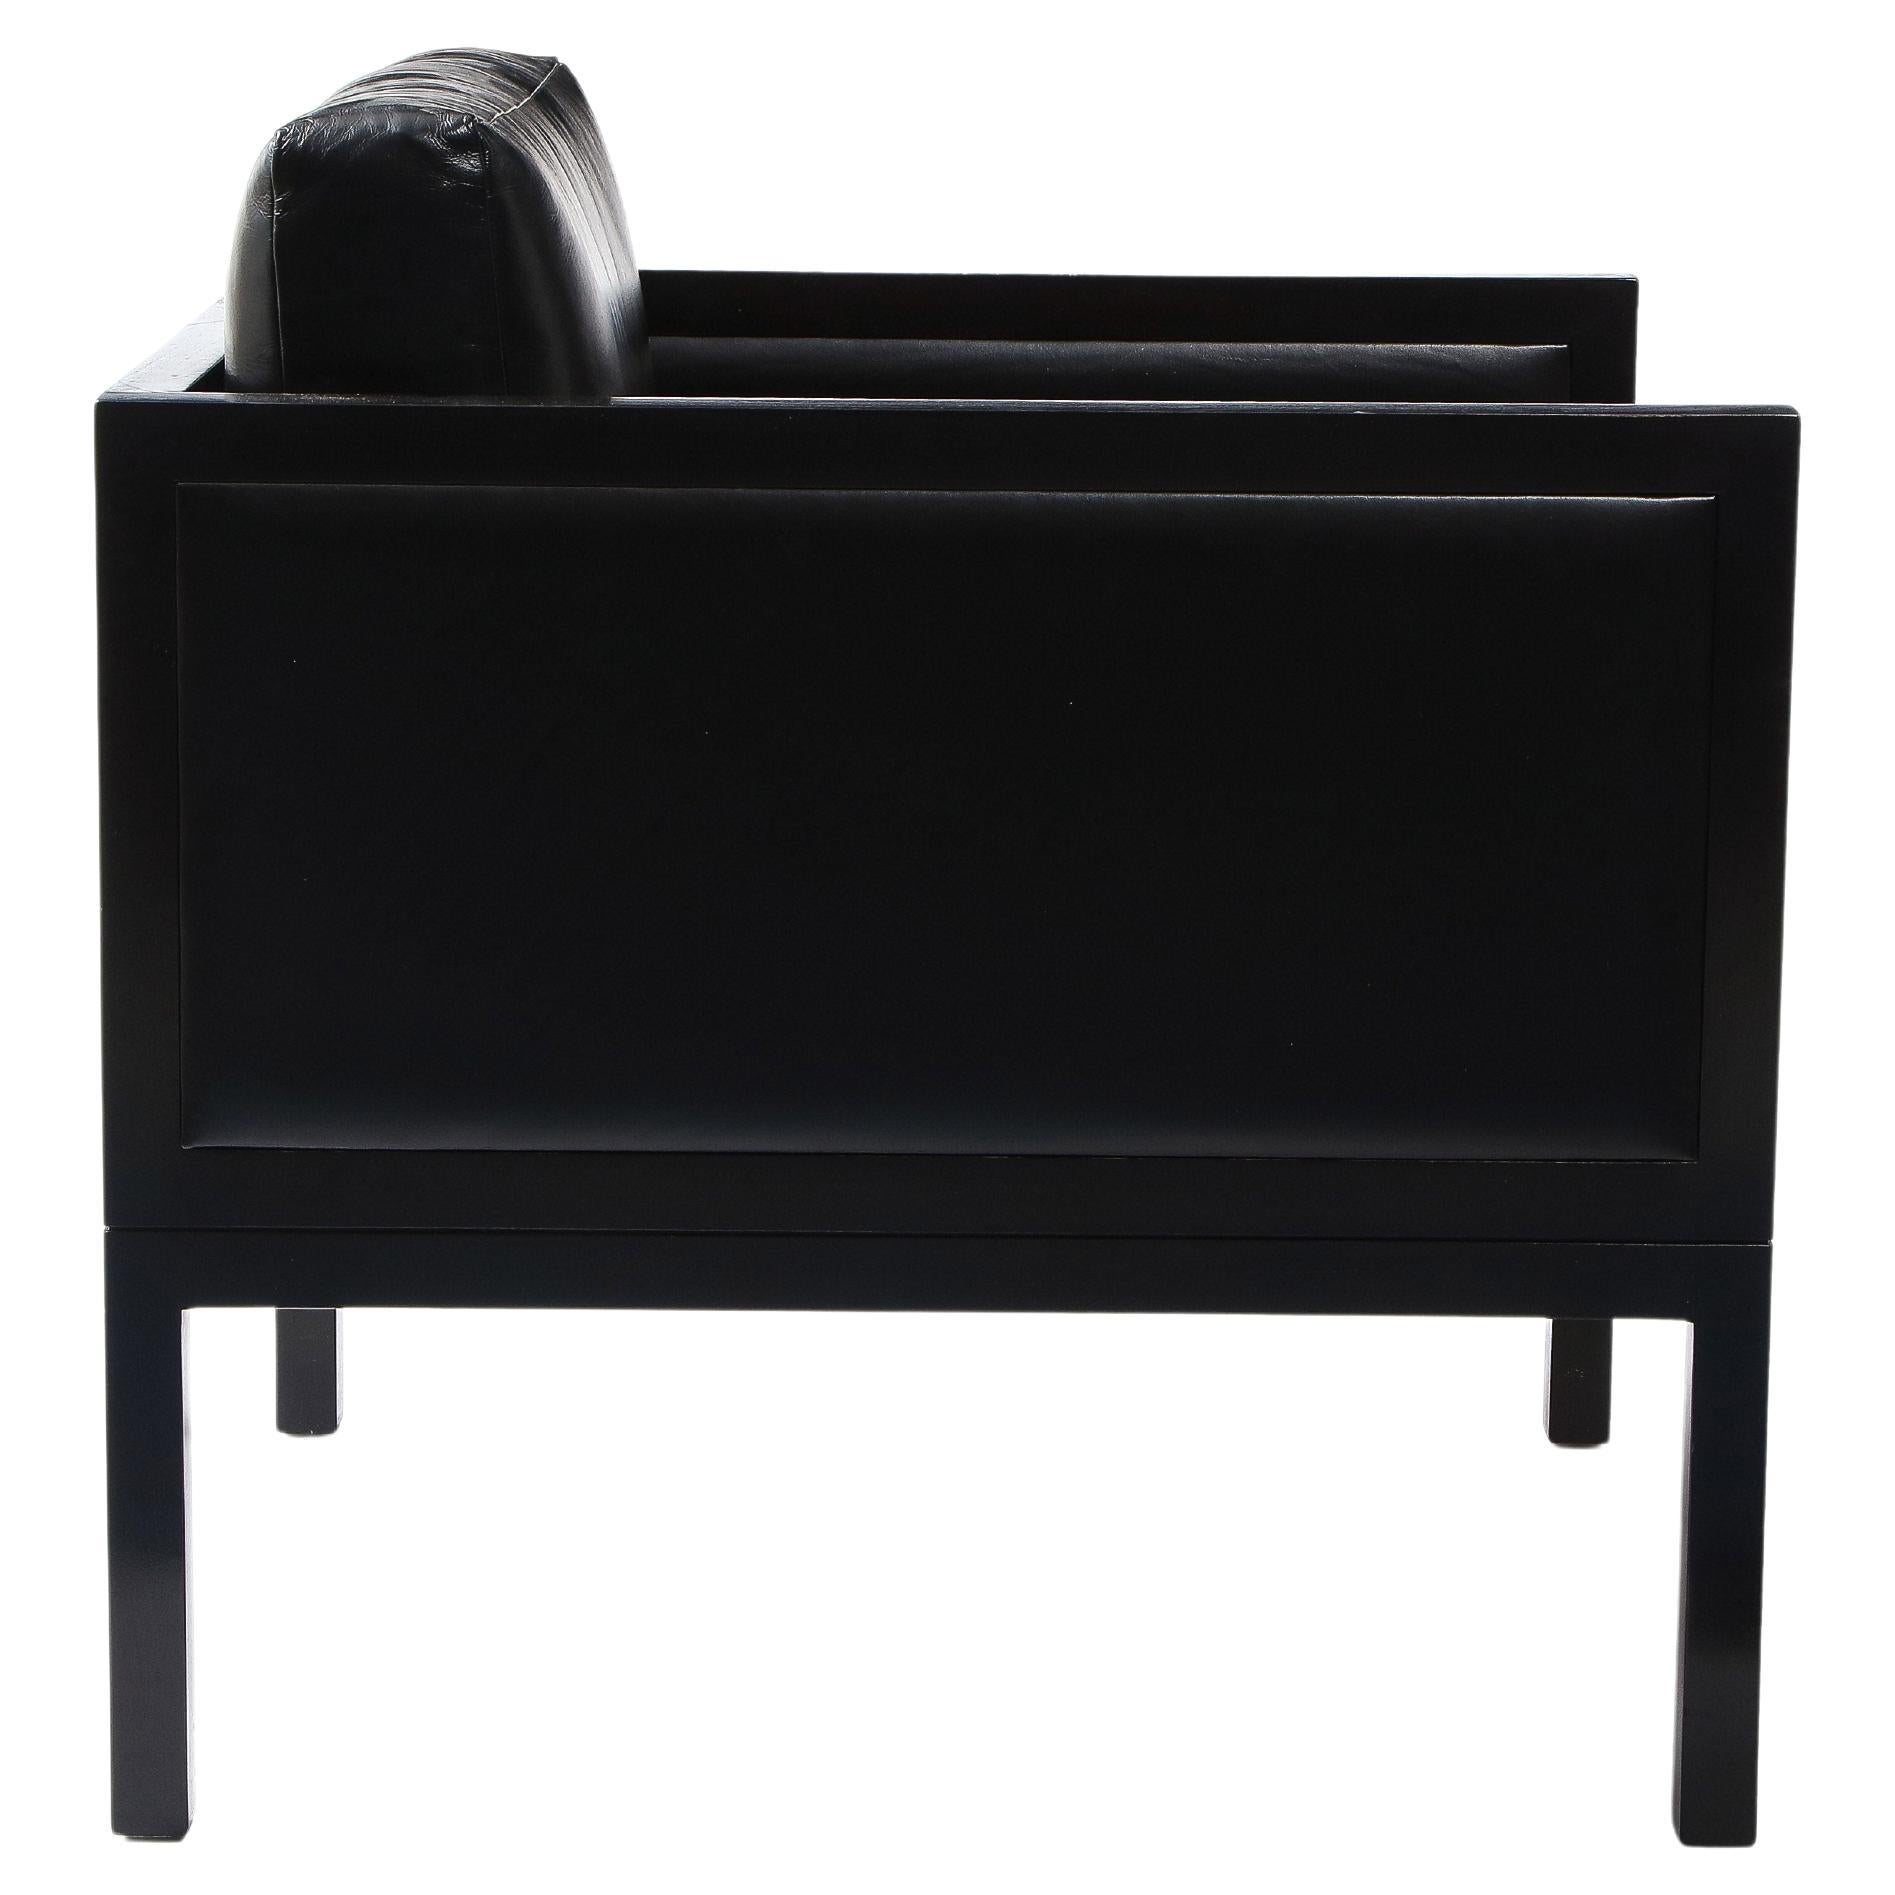 A piece from MEIER/FERRER, the furniture collaboration of Ana Meier and Charlie Ferrer.

This strict form is quite comfortable, suitable for lounging. Tonal black palette of leather, wood and metal.